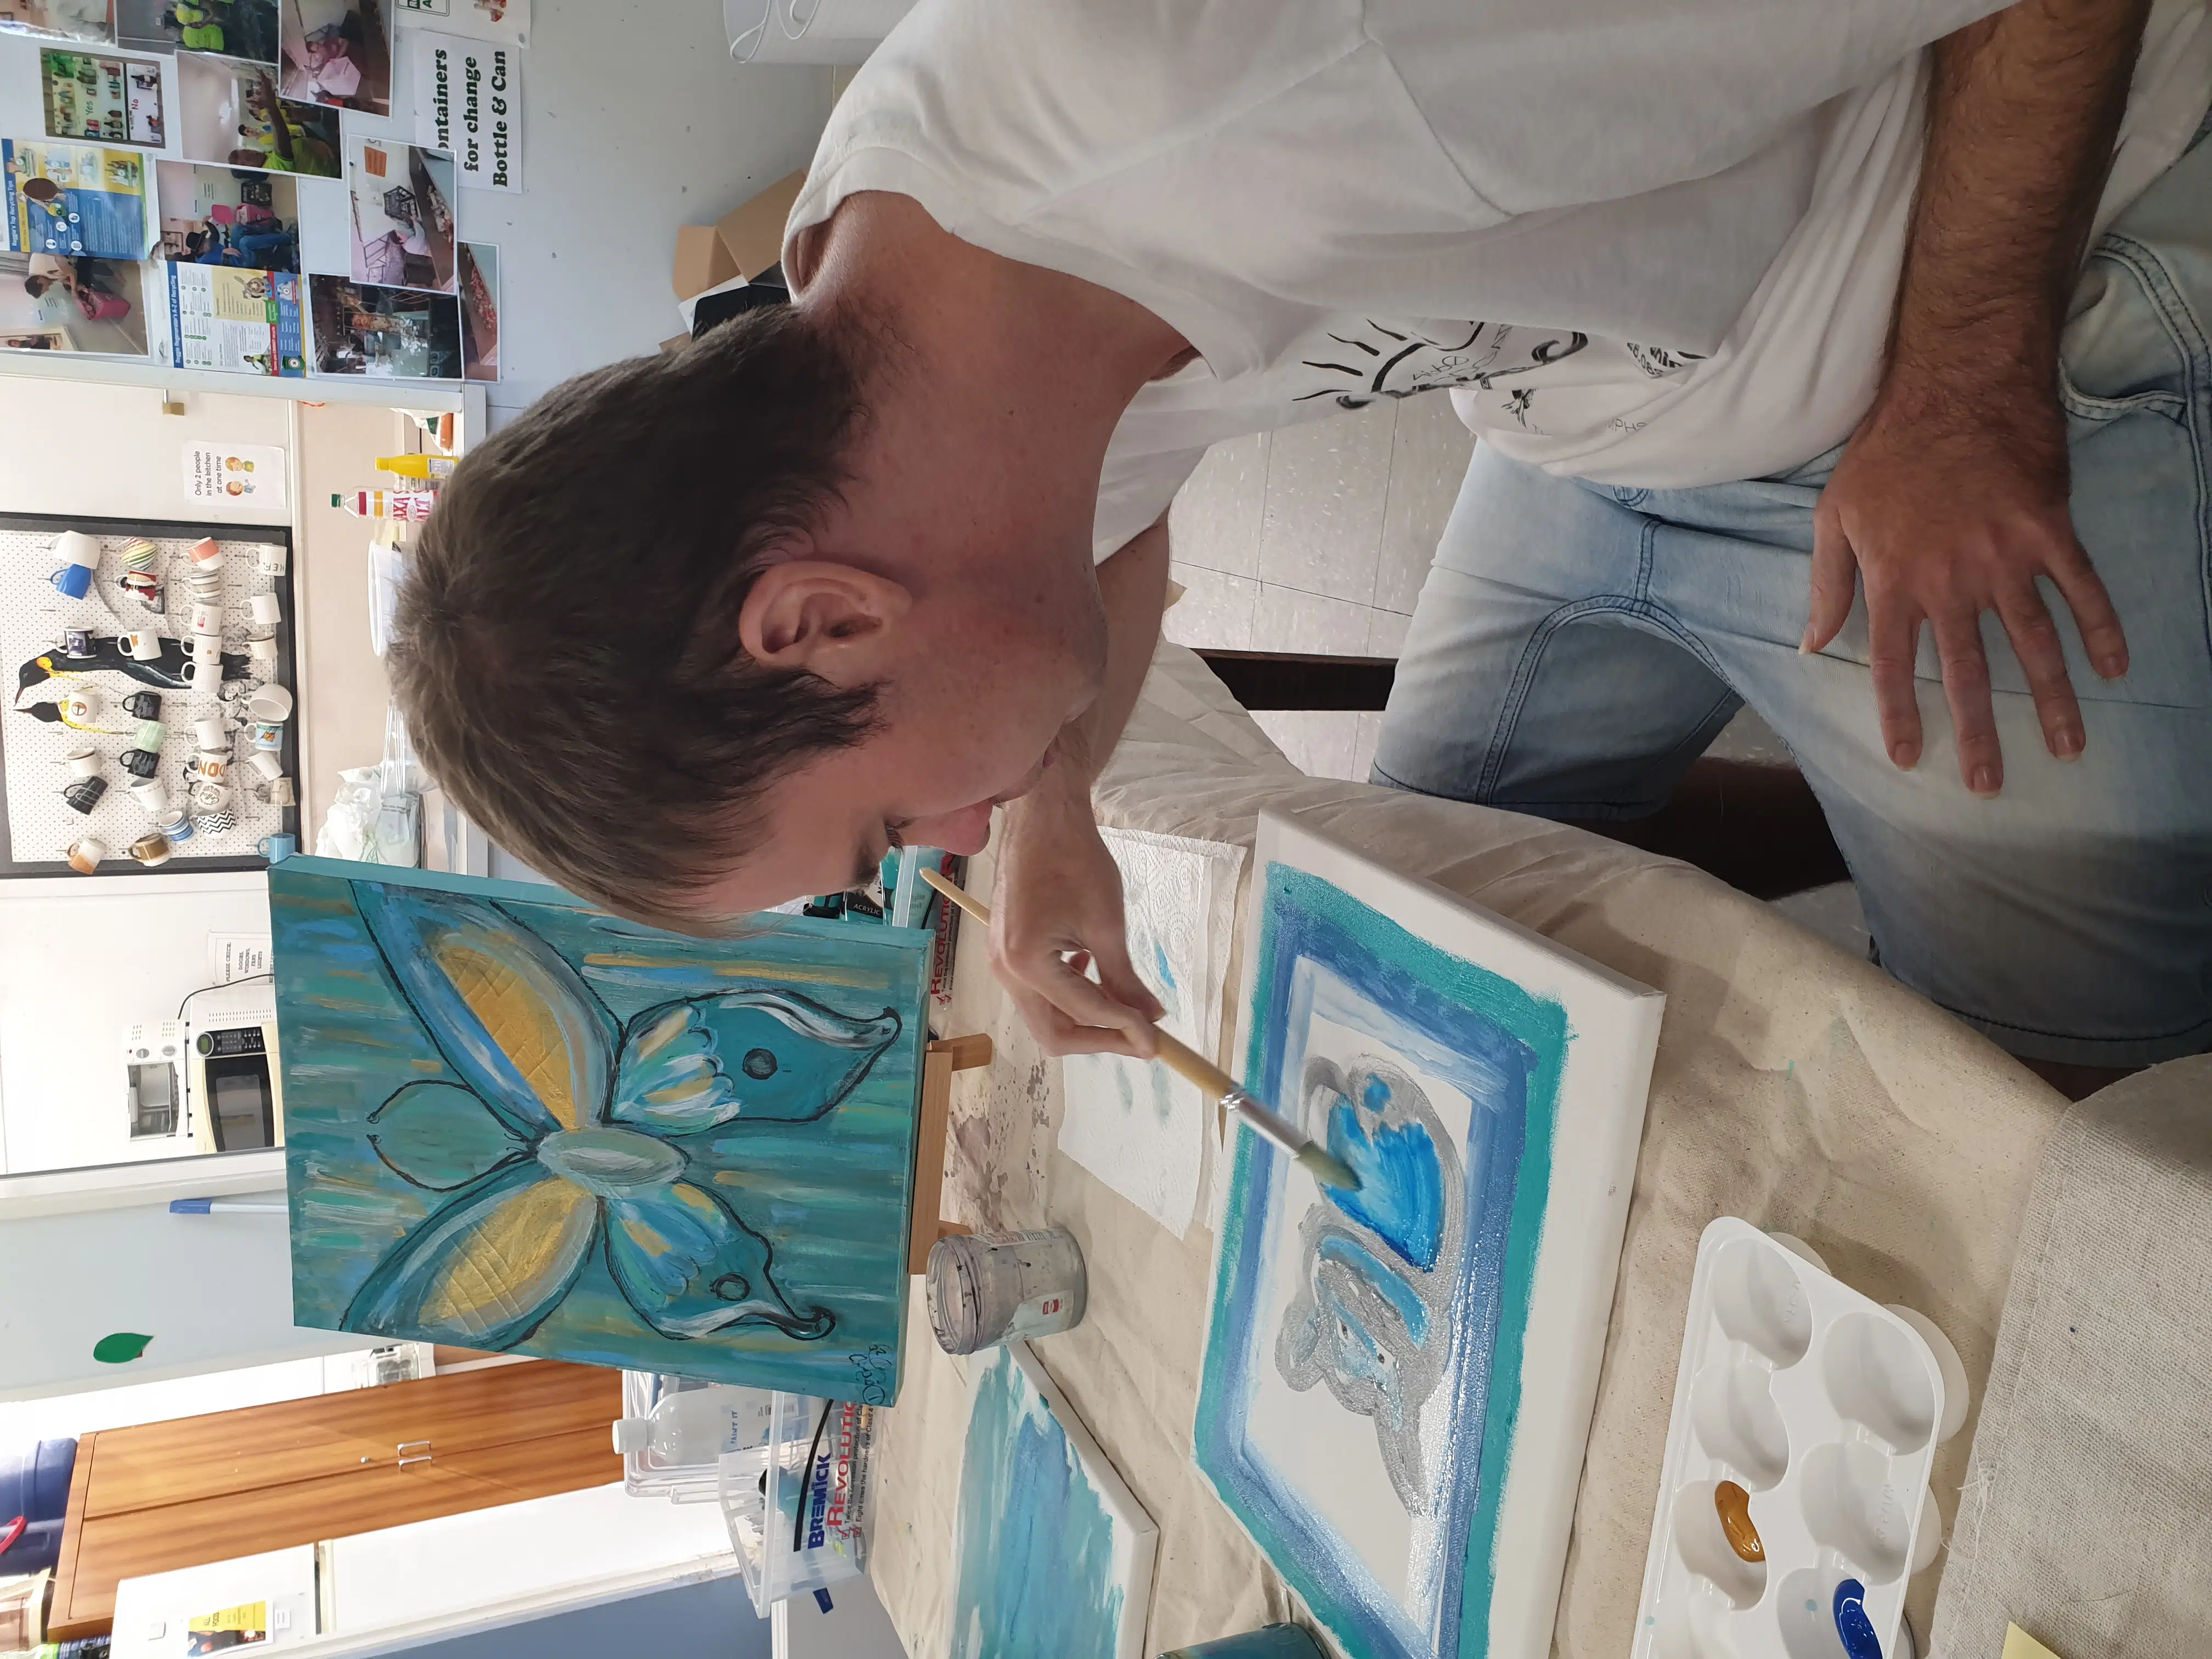 Chris Painting — Supported Independent Living in Bundaberg, QLD